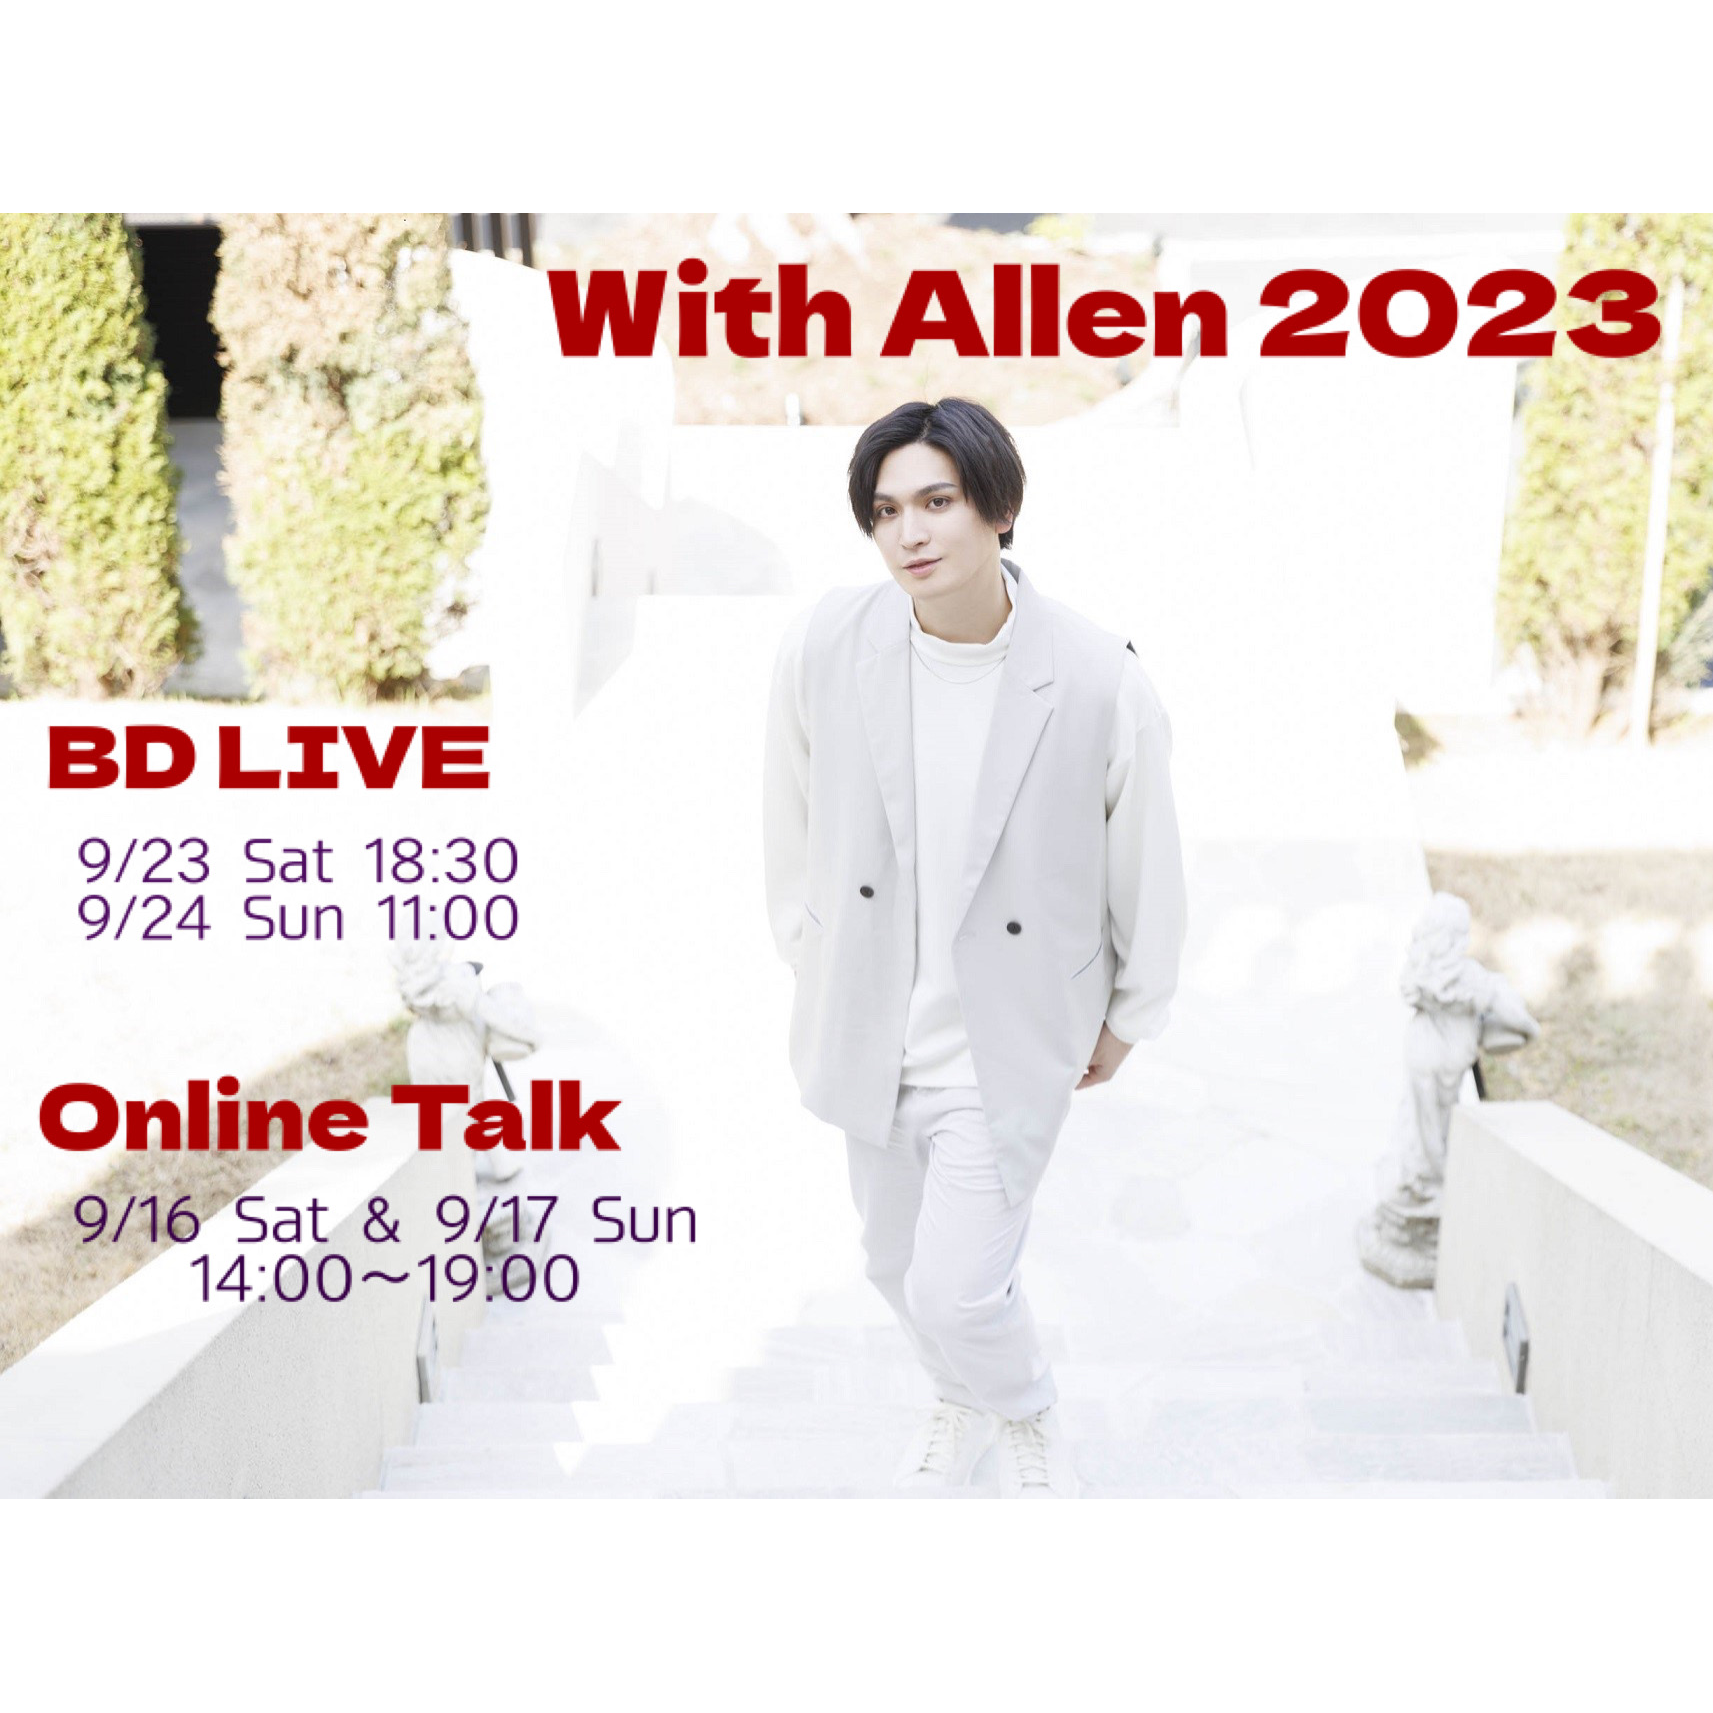 With Allen 2023 BD LIVE